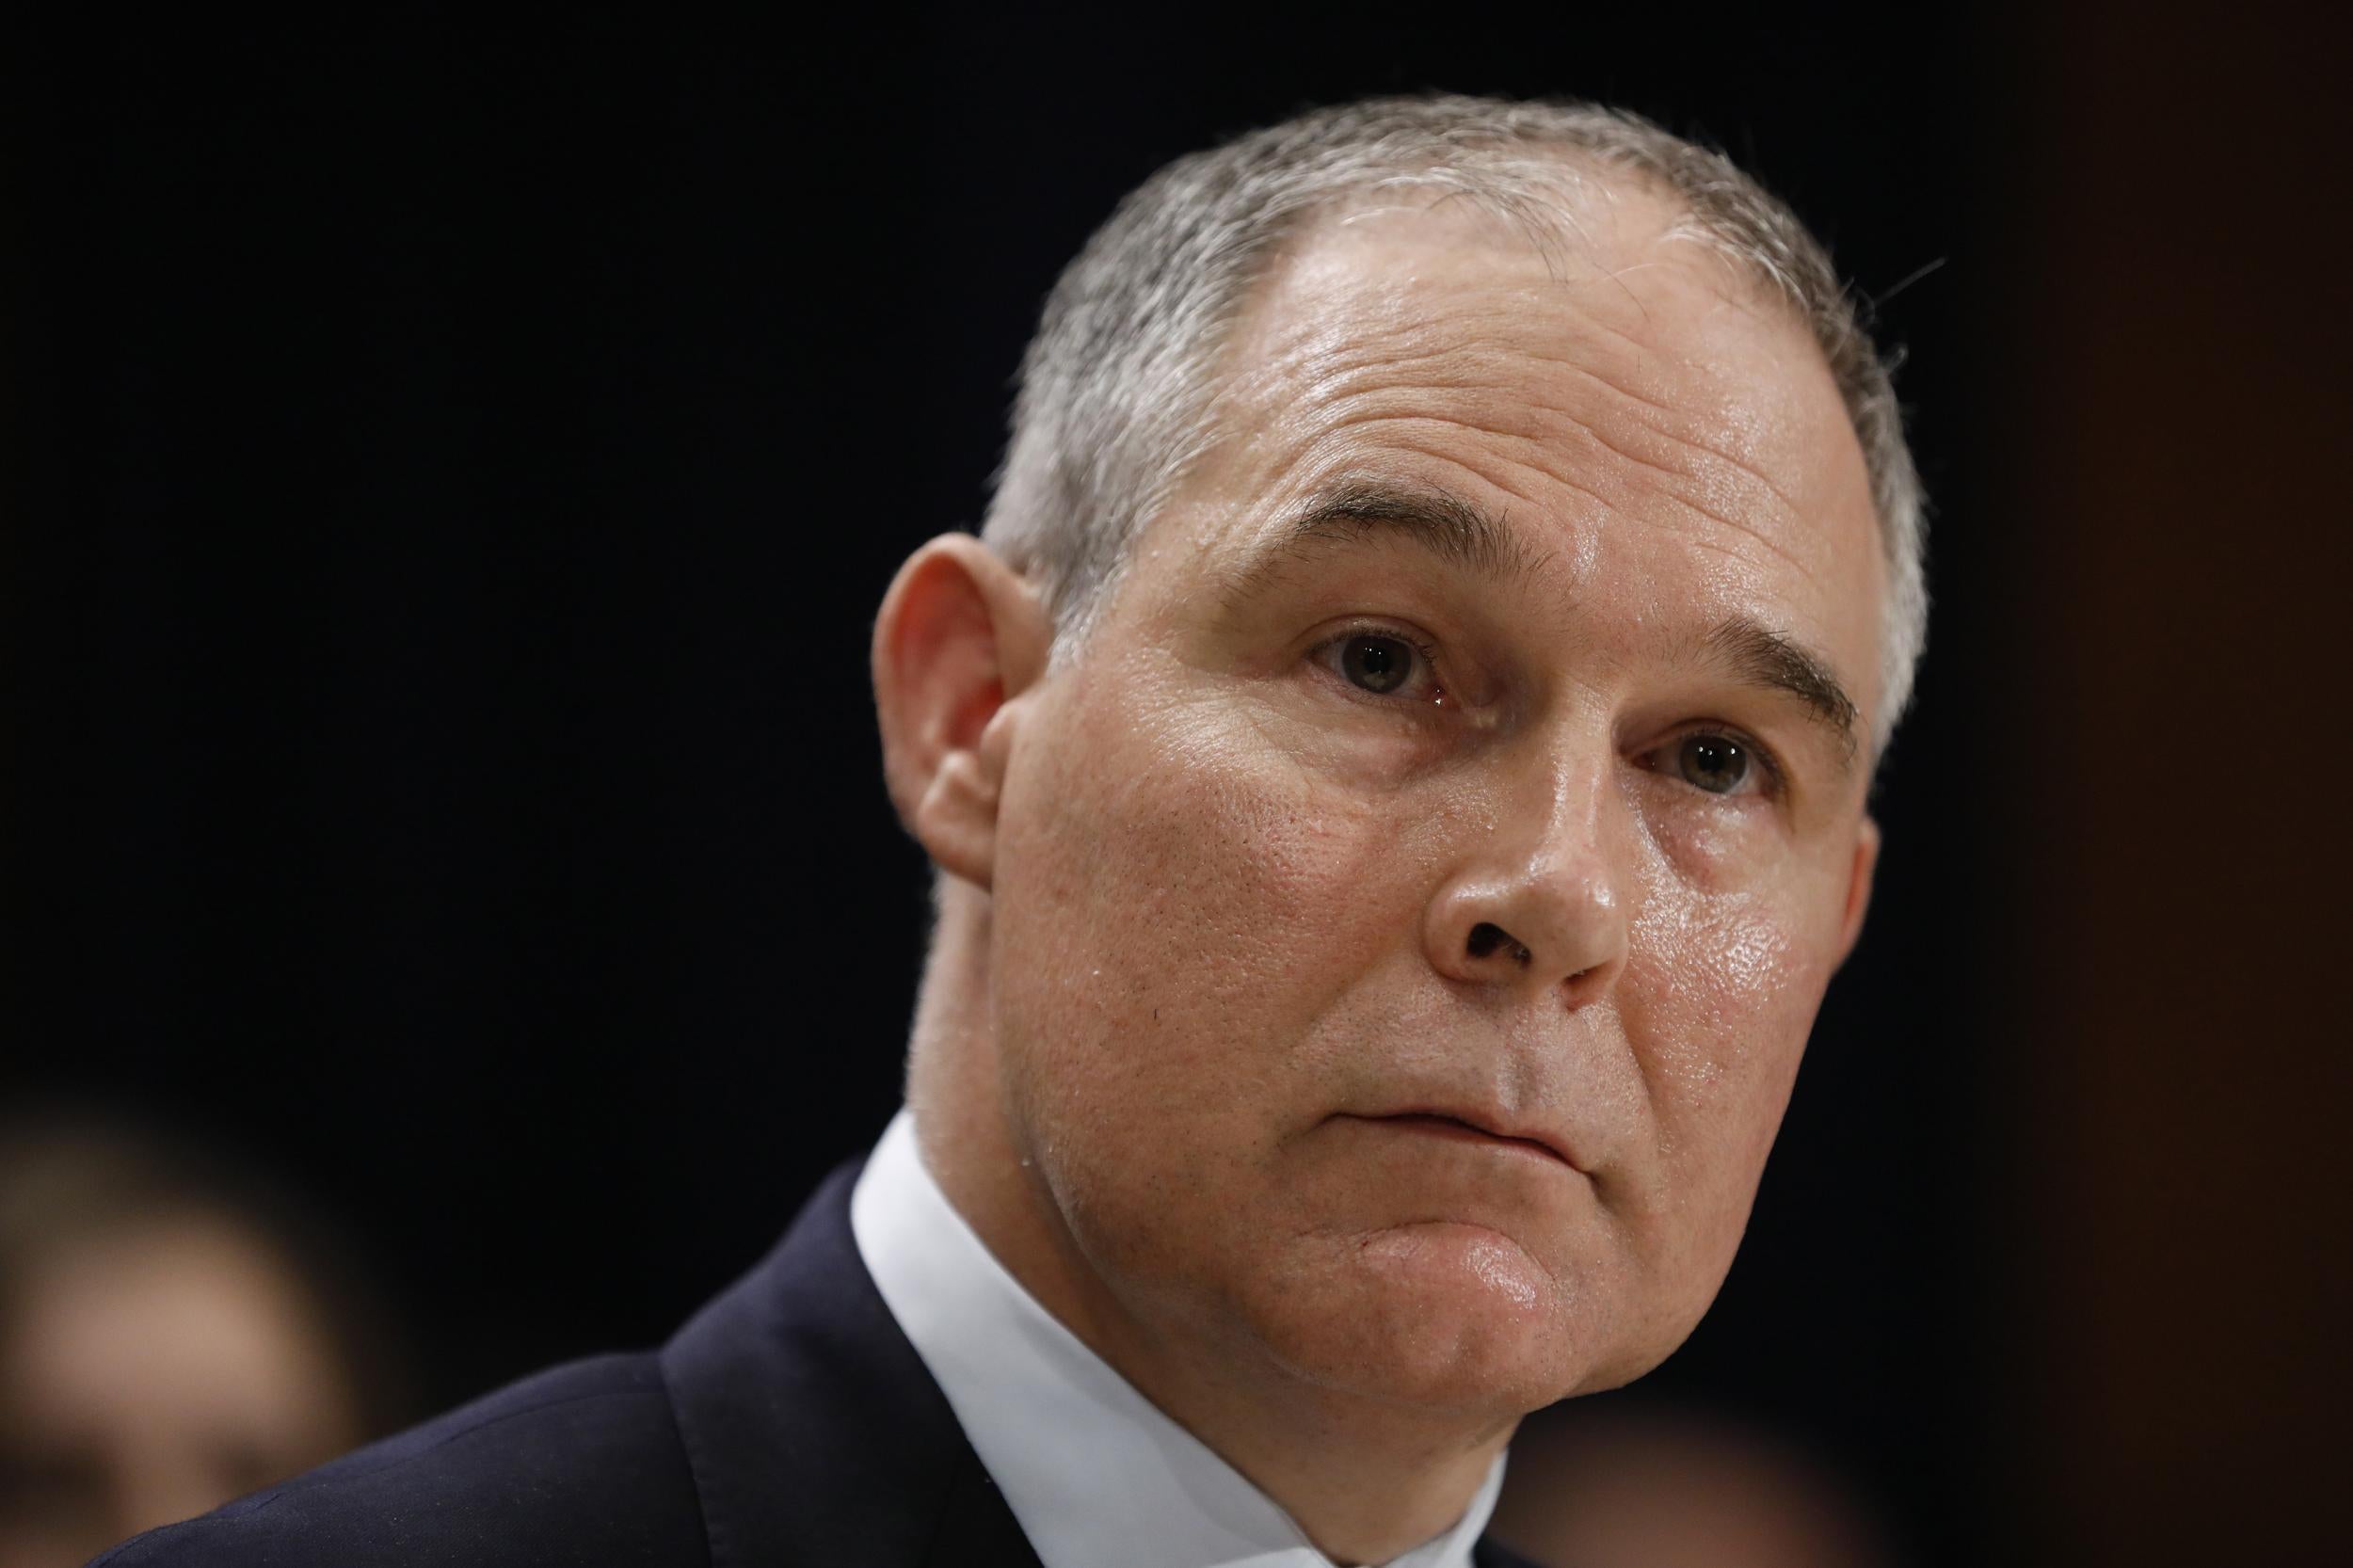 Scott Pruitt previously claimed carbon dioxide was not a primary cause of global warming, despite the views of scientists all over the world